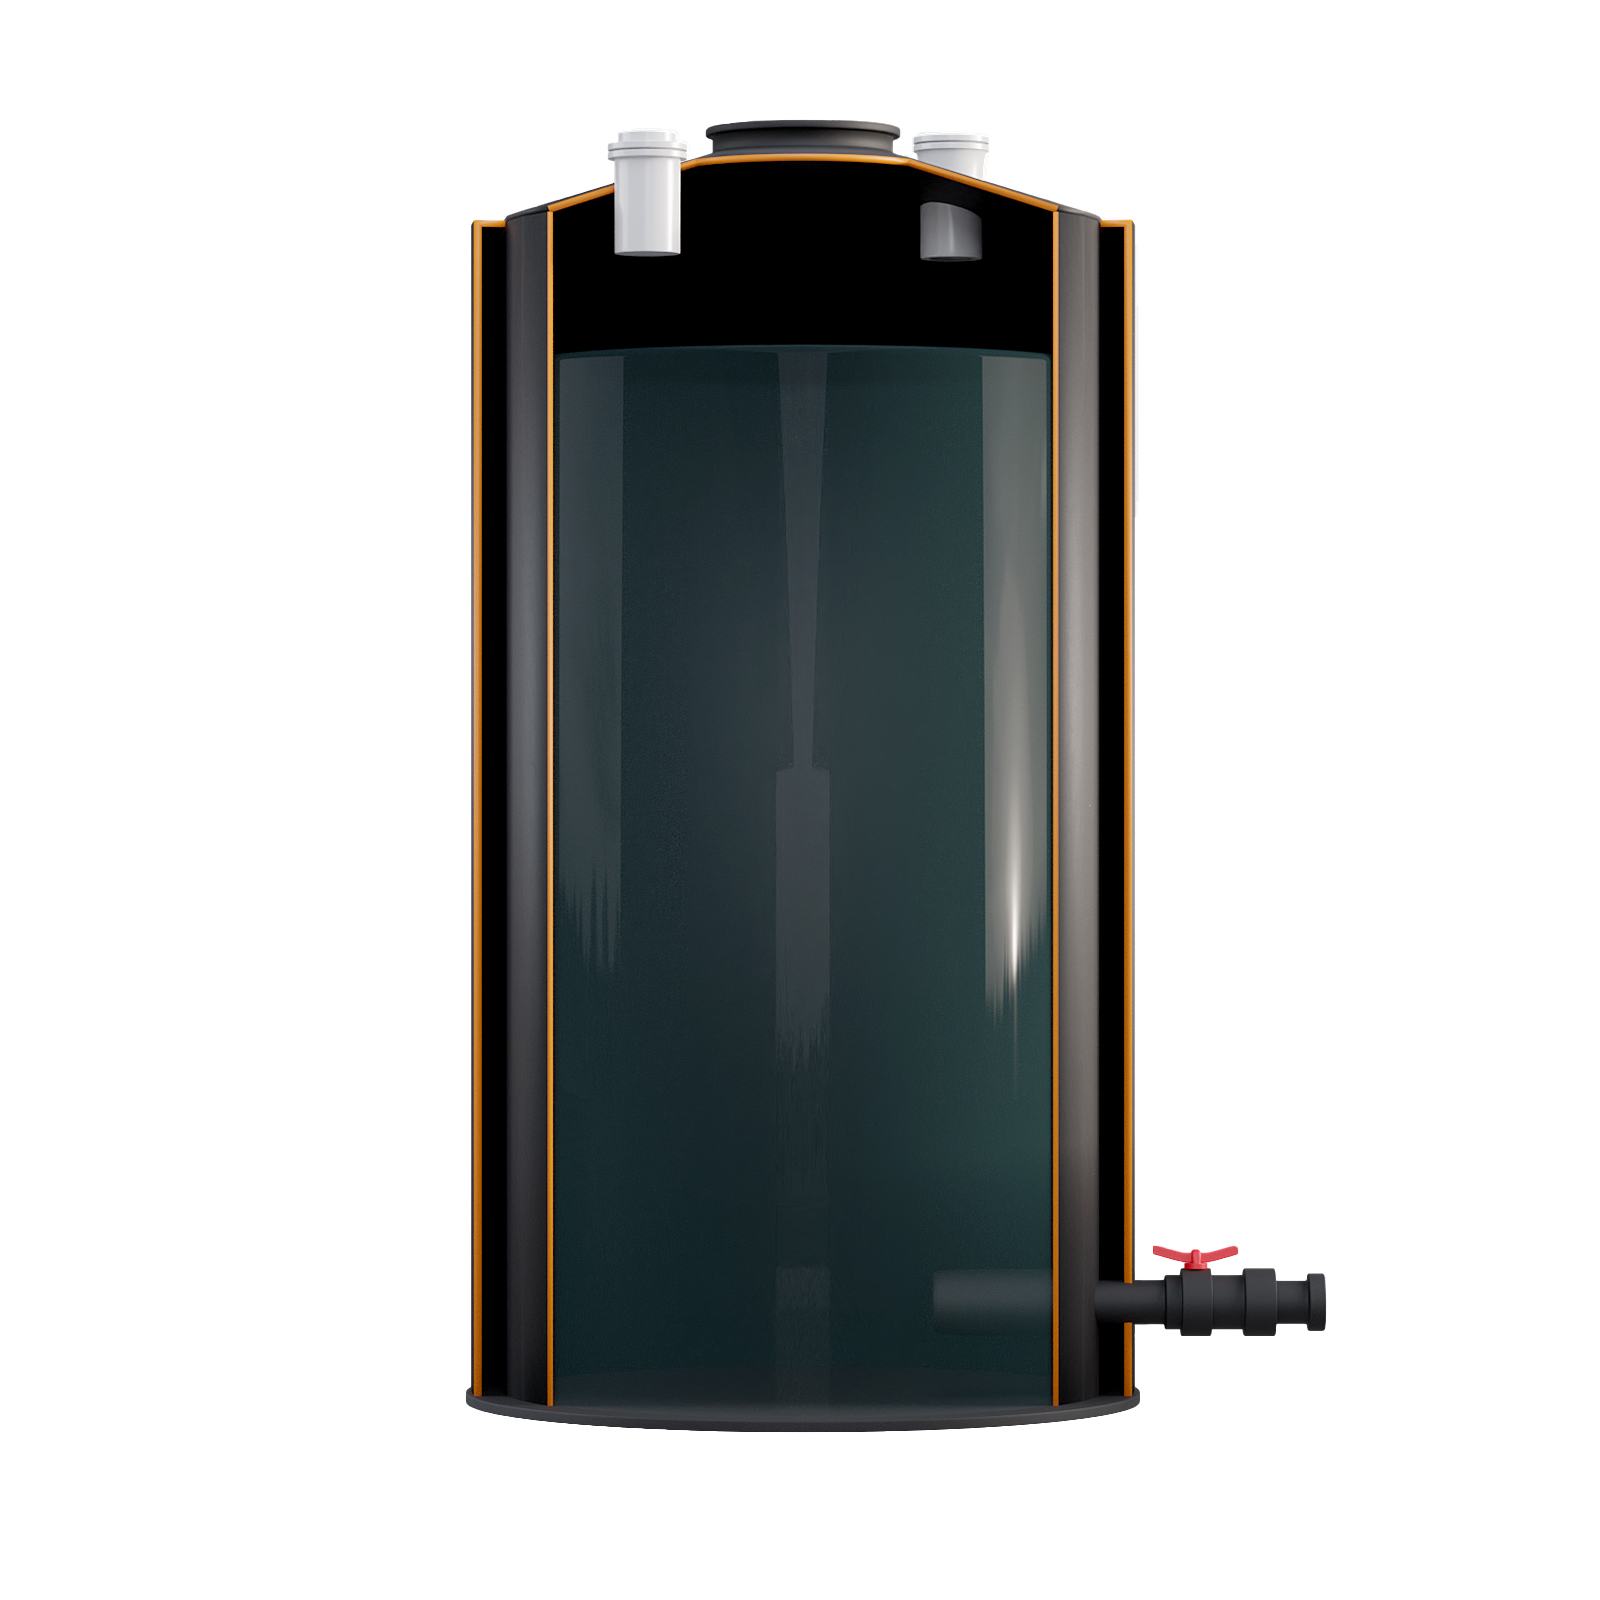 Black chemical storage tank with orange trim around and a black hose at the bottom